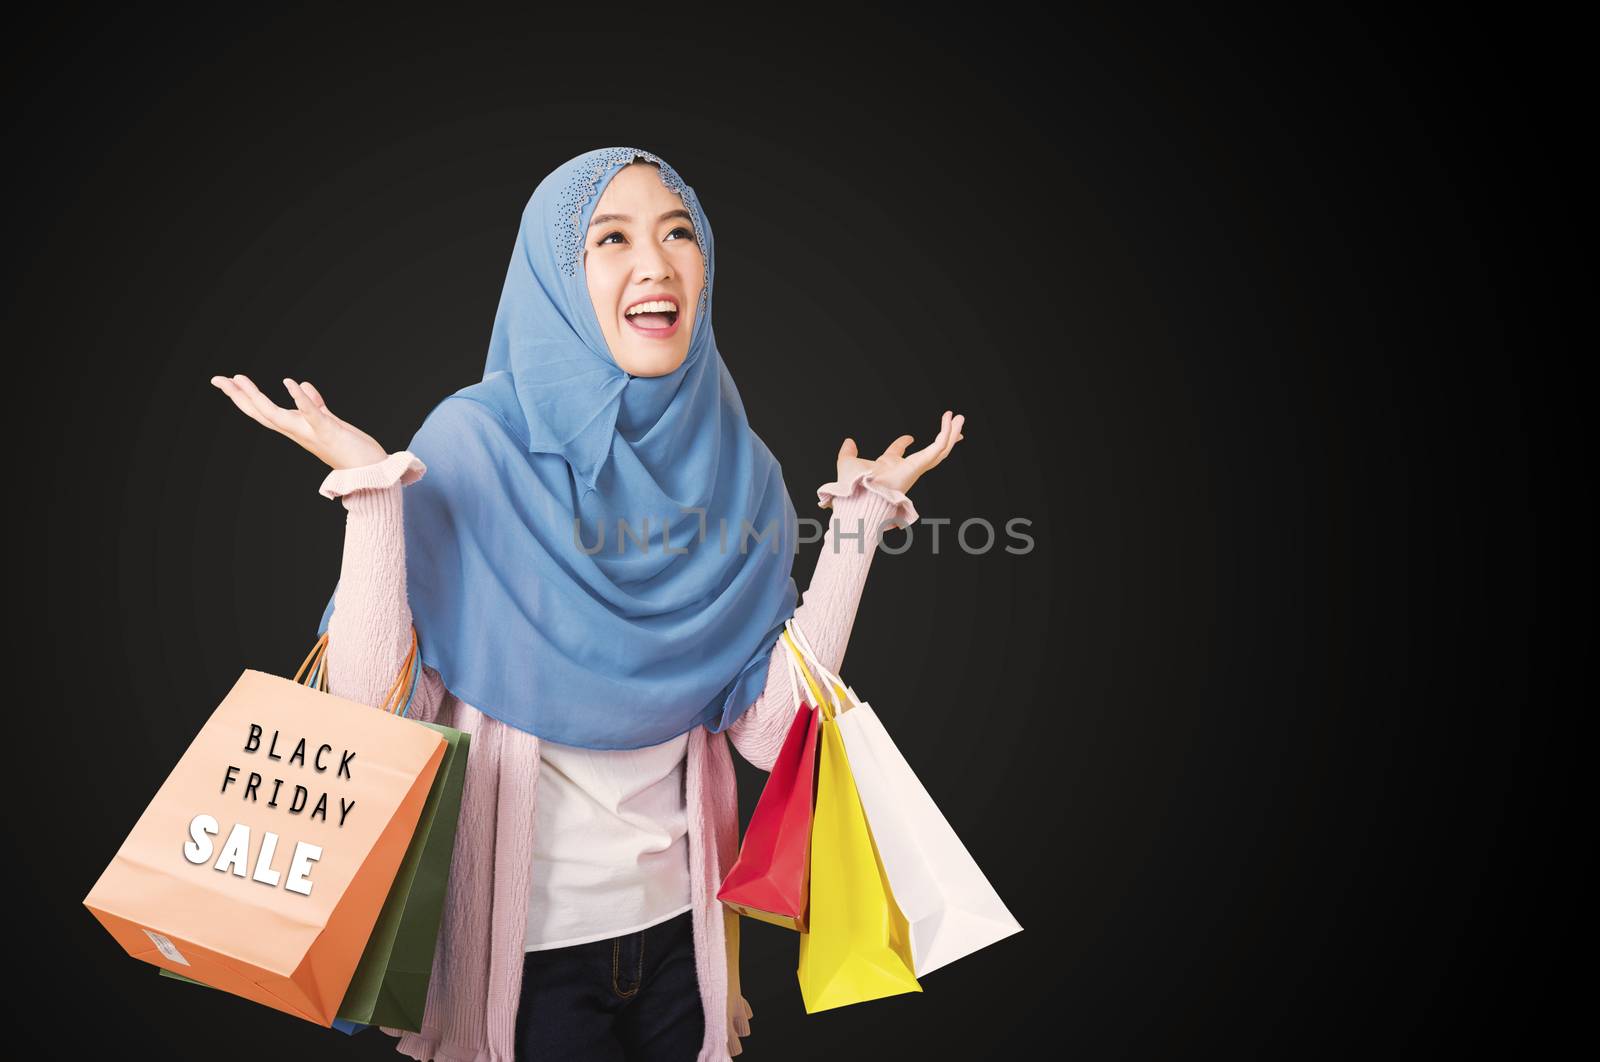 woman Muslim smiling funny wear veil hijab she excited holding s by Sorapop